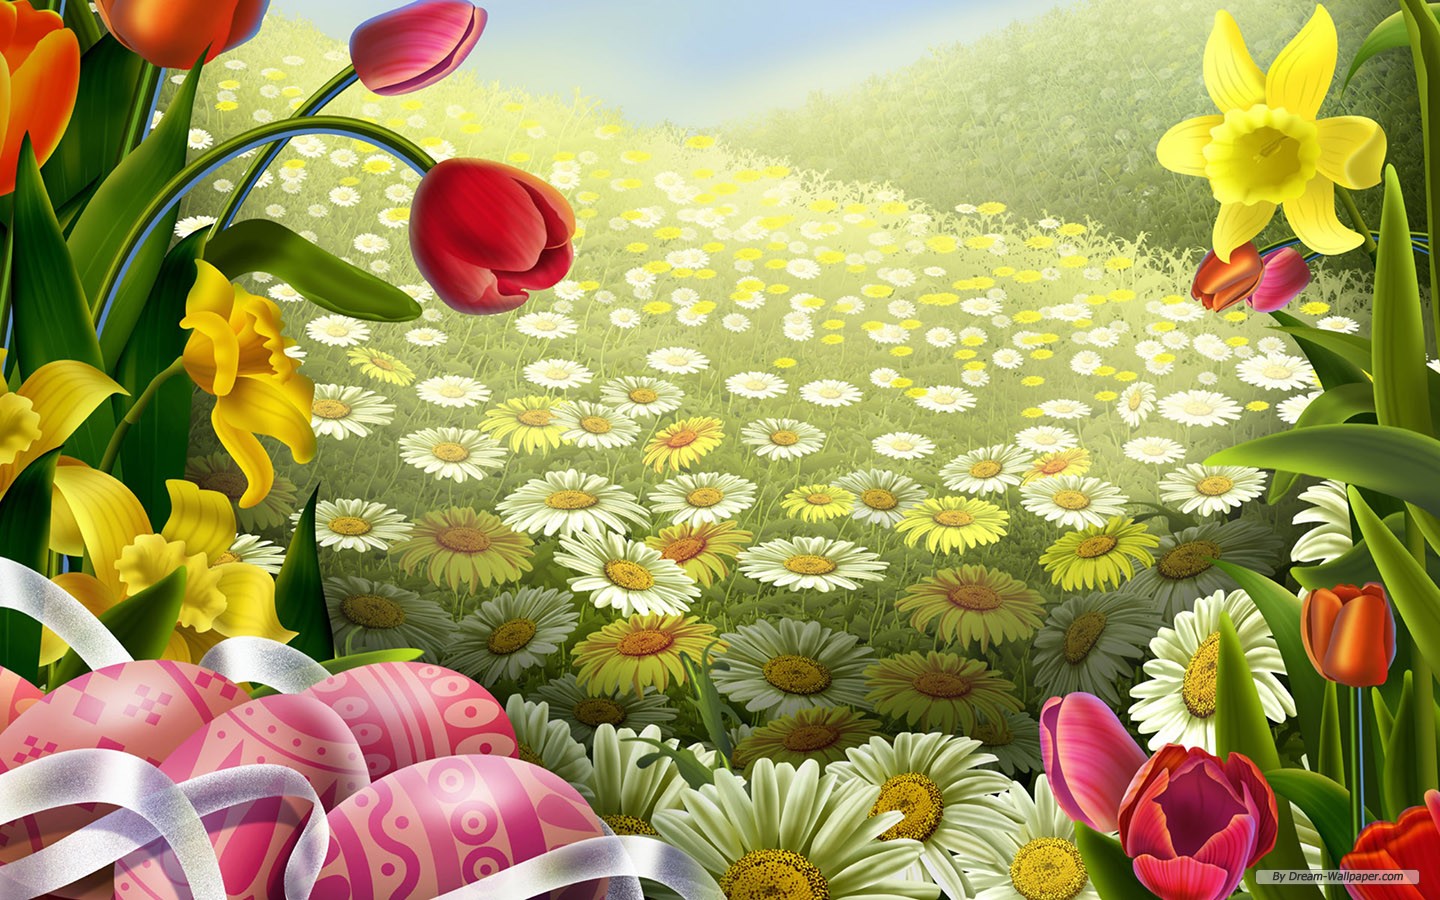 2013 Top 25 Cure Easter Day Wallpapers for Android Phones 1440x900